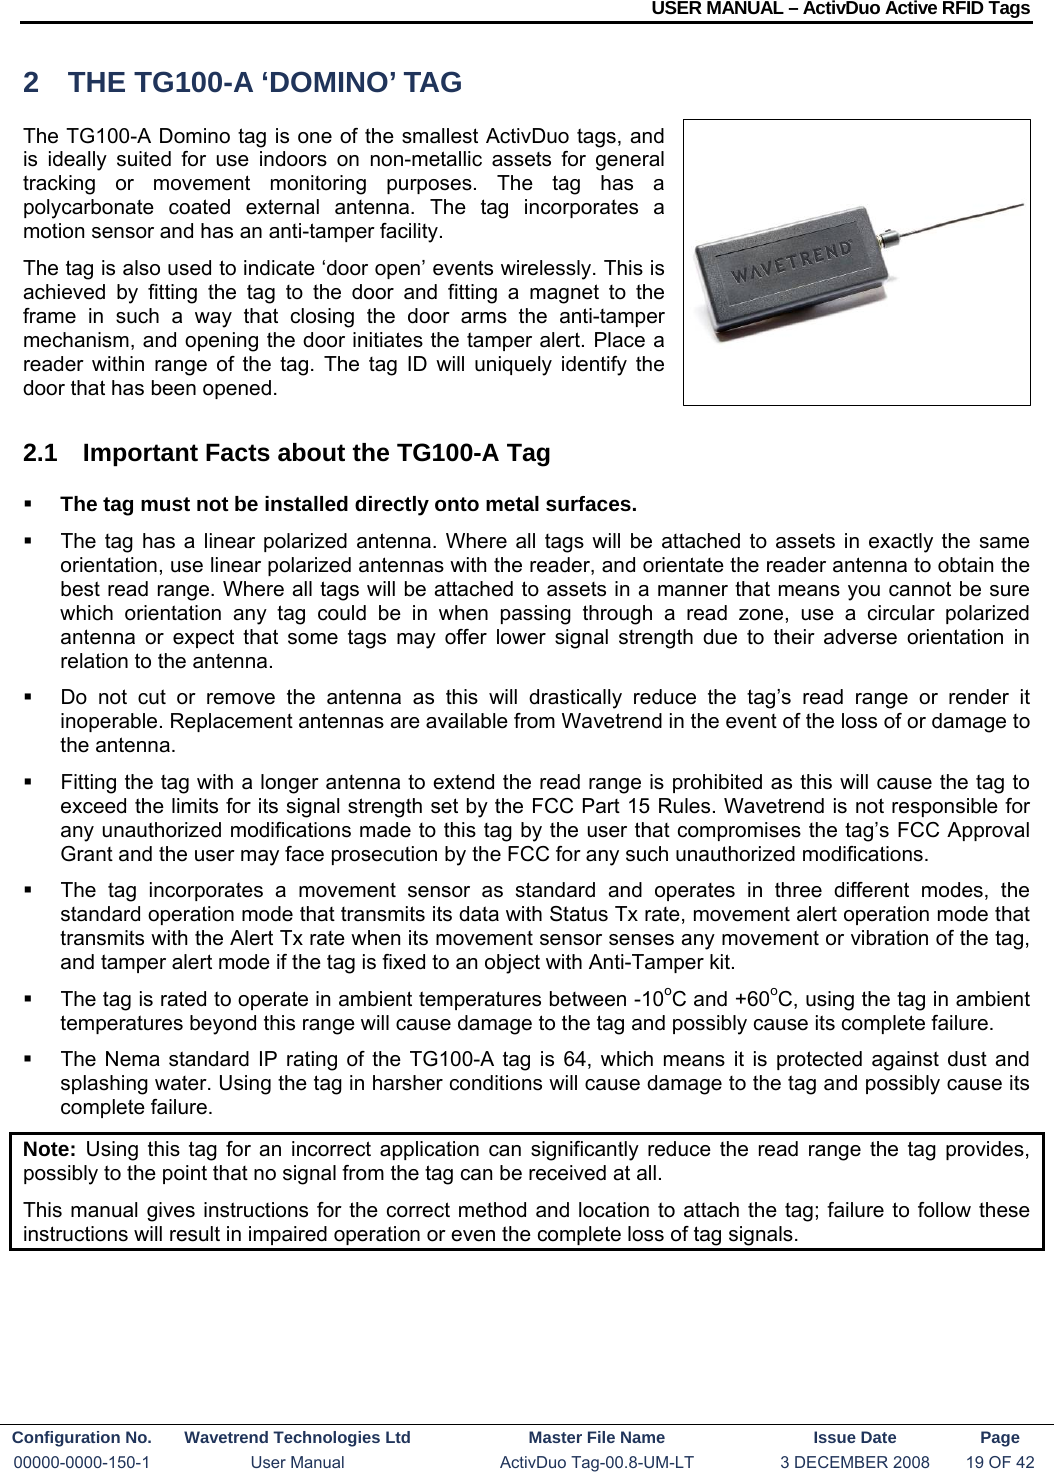 USER MANUAL – ActivDuo Active RFID Tags Configuration No.  Wavetrend Technologies Ltd  Master File Name   Issue Date  Page 00000-0000-150-1  User Manual  ActivDuo Tag-00.8-UM-LT  3 DECEMBER 2008  19 OF 42  2  THE TG100-A ‘DOMINO’ TAG The TG100-A Domino tag is one of the smallest ActivDuo tags, and is ideally suited for use indoors on non-metallic assets for general tracking or movement monitoring purposes. The tag has a polycarbonate coated external antenna. The tag incorporates a motion sensor and has an anti-tamper facility. The tag is also used to indicate ‘door open’ events wirelessly. This is achieved by fitting the tag to the door and fitting a magnet to the frame in such a way that closing the door arms the anti-tamper mechanism, and opening the door initiates the tamper alert. Place a reader within range of the tag. The tag ID will uniquely identify the door that has been opened. 2.1  Important Facts about the TG100-A Tag  The tag must not be installed directly onto metal surfaces.    The tag has a linear polarized antenna. Where all tags will be attached to assets in exactly the same orientation, use linear polarized antennas with the reader, and orientate the reader antenna to obtain the best read range. Where all tags will be attached to assets in a manner that means you cannot be sure which orientation any tag could be in when passing through a read zone, use a circular polarized antenna or expect that some tags may offer lower signal strength due to their adverse orientation in relation to the antenna.   Do not cut or remove the antenna as this will drastically reduce the tag’s read range or render it inoperable. Replacement antennas are available from Wavetrend in the event of the loss of or damage to the antenna.    Fitting the tag with a longer antenna to extend the read range is prohibited as this will cause the tag to exceed the limits for its signal strength set by the FCC Part 15 Rules. Wavetrend is not responsible for any unauthorized modifications made to this tag by the user that compromises the tag’s FCC Approval Grant and the user may face prosecution by the FCC for any such unauthorized modifications.   The tag incorporates a movement sensor as standard and operates in three different modes, the standard operation mode that transmits its data with Status Tx rate, movement alert operation mode that transmits with the Alert Tx rate when its movement sensor senses any movement or vibration of the tag, and tamper alert mode if the tag is fixed to an object with Anti-Tamper kit.   The tag is rated to operate in ambient temperatures between -10oC and +60oC, using the tag in ambient temperatures beyond this range will cause damage to the tag and possibly cause its complete failure.   The Nema standard IP rating of the TG100-A tag is 64, which means it is protected against dust and splashing water. Using the tag in harsher conditions will cause damage to the tag and possibly cause its complete failure. Note:  Using this tag for an incorrect application can significantly reduce the read range the tag provides, possibly to the point that no signal from the tag can be received at all. This manual gives instructions for the correct method and location to attach the tag; failure to follow these instructions will result in impaired operation or even the complete loss of tag signals.  